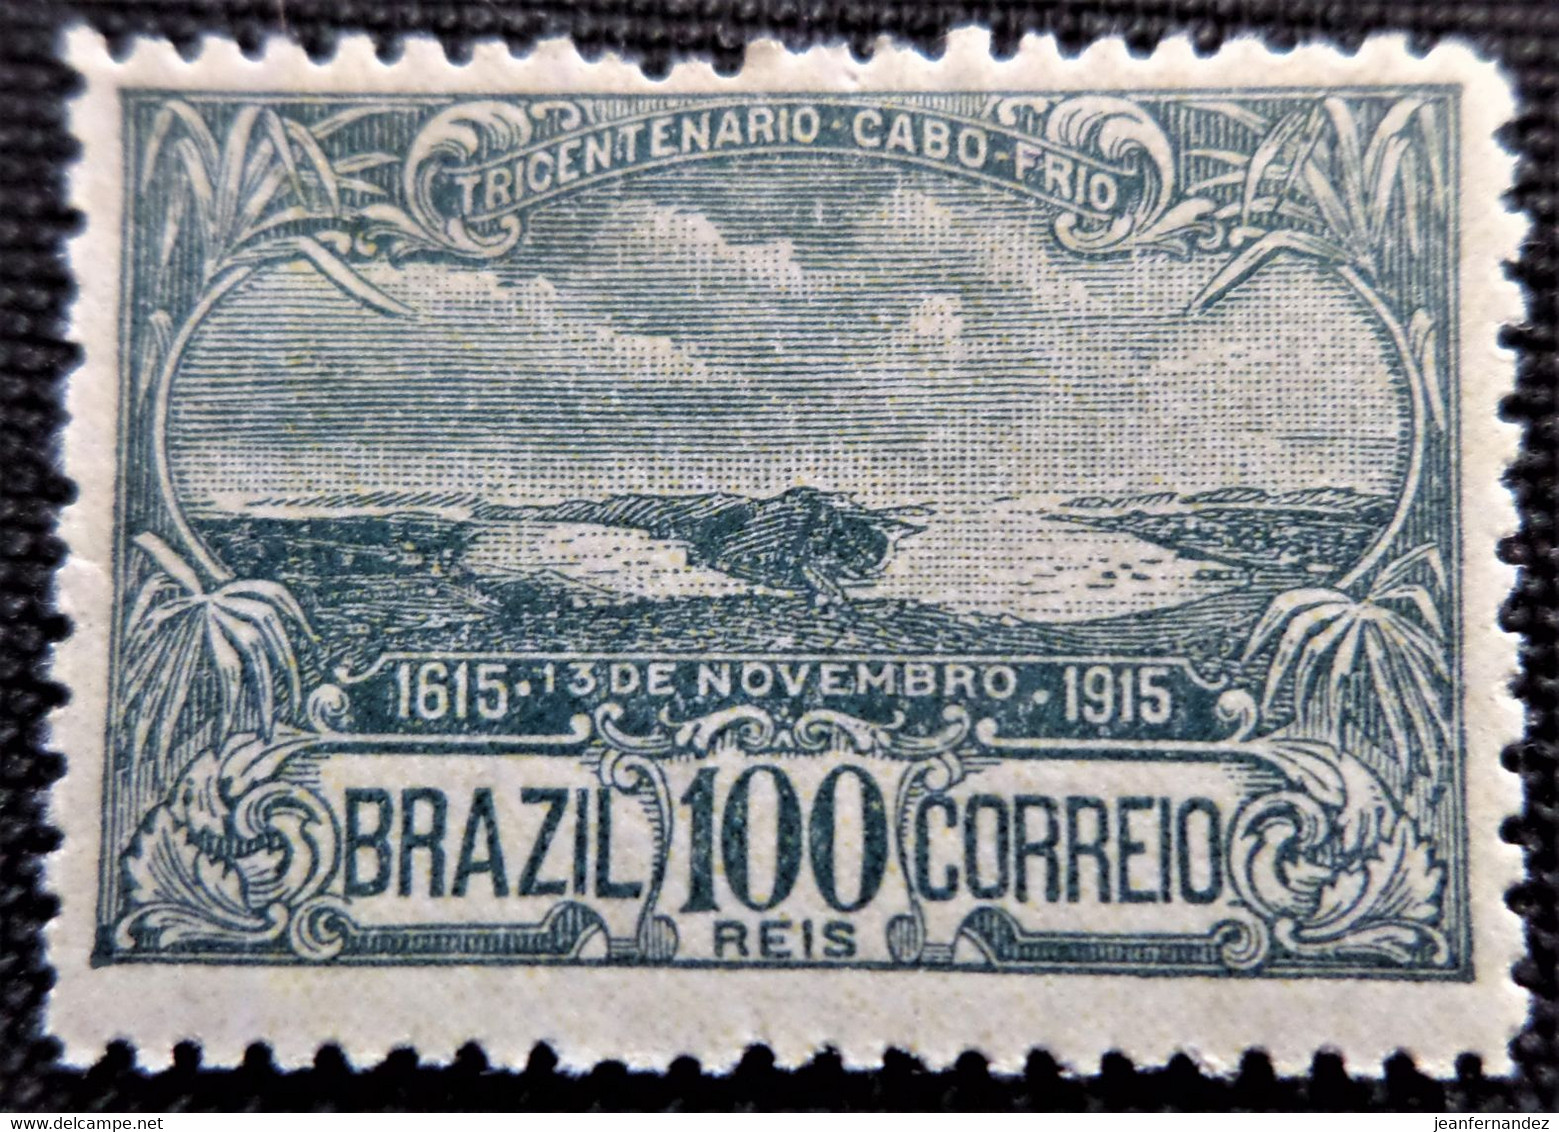 Timbre Du Brésil 1915  300th Anniversary Of The Founding Of Cabo Frio Stampworld N° 197 Neuf Avec Trace De Charnière - Unused Stamps